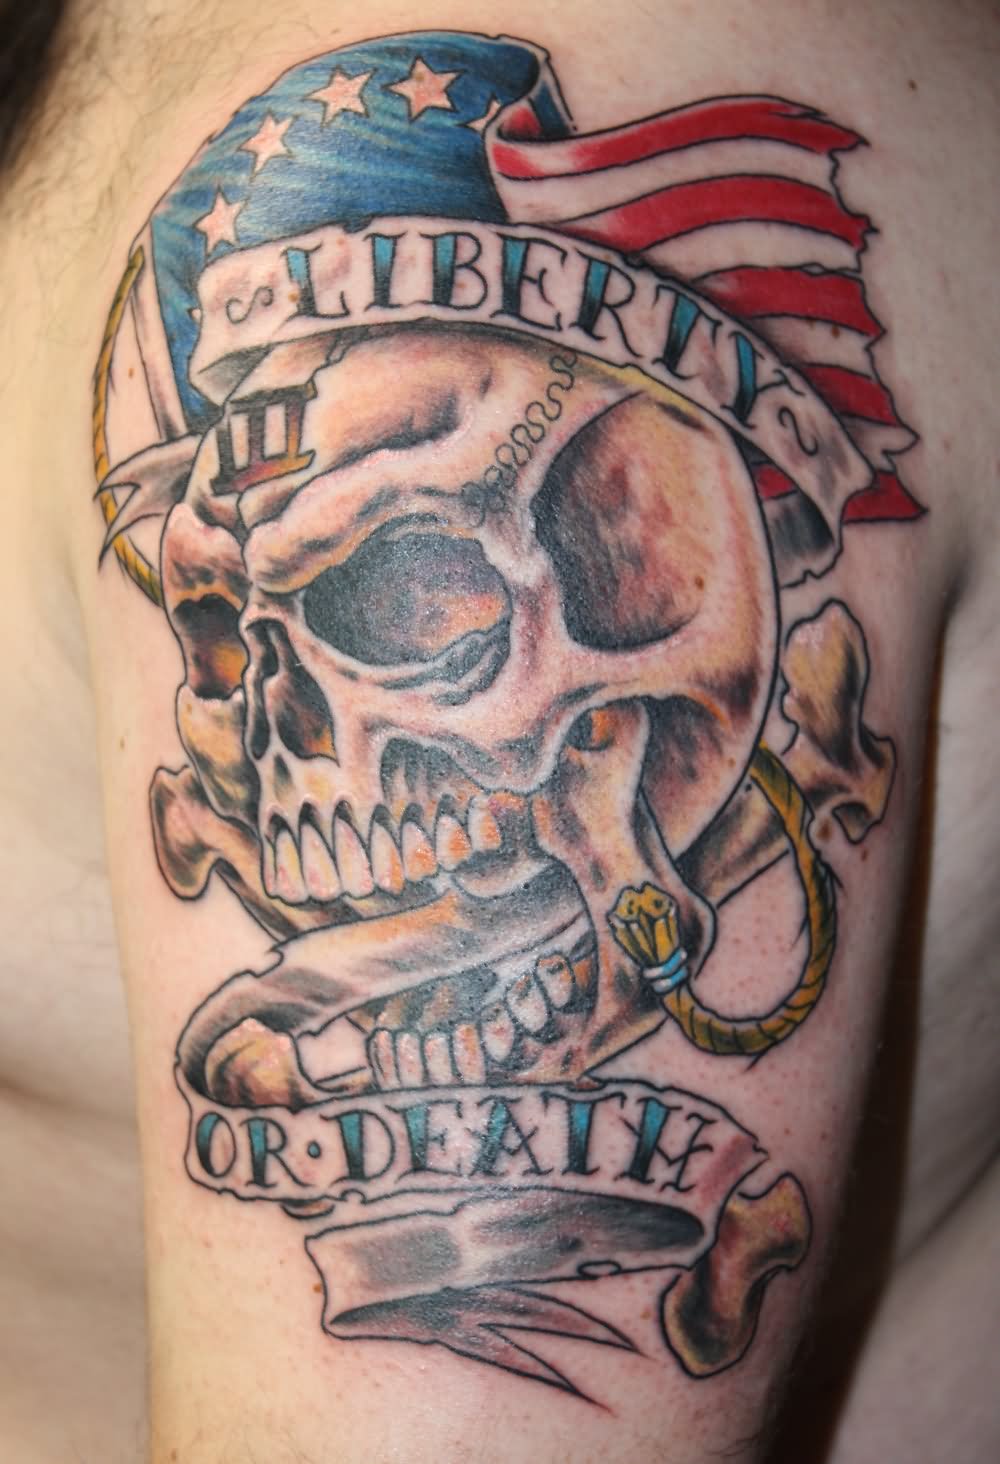 USA Flag With Skull And Liberty Or Death Banner Tattoo Design For Shoulder